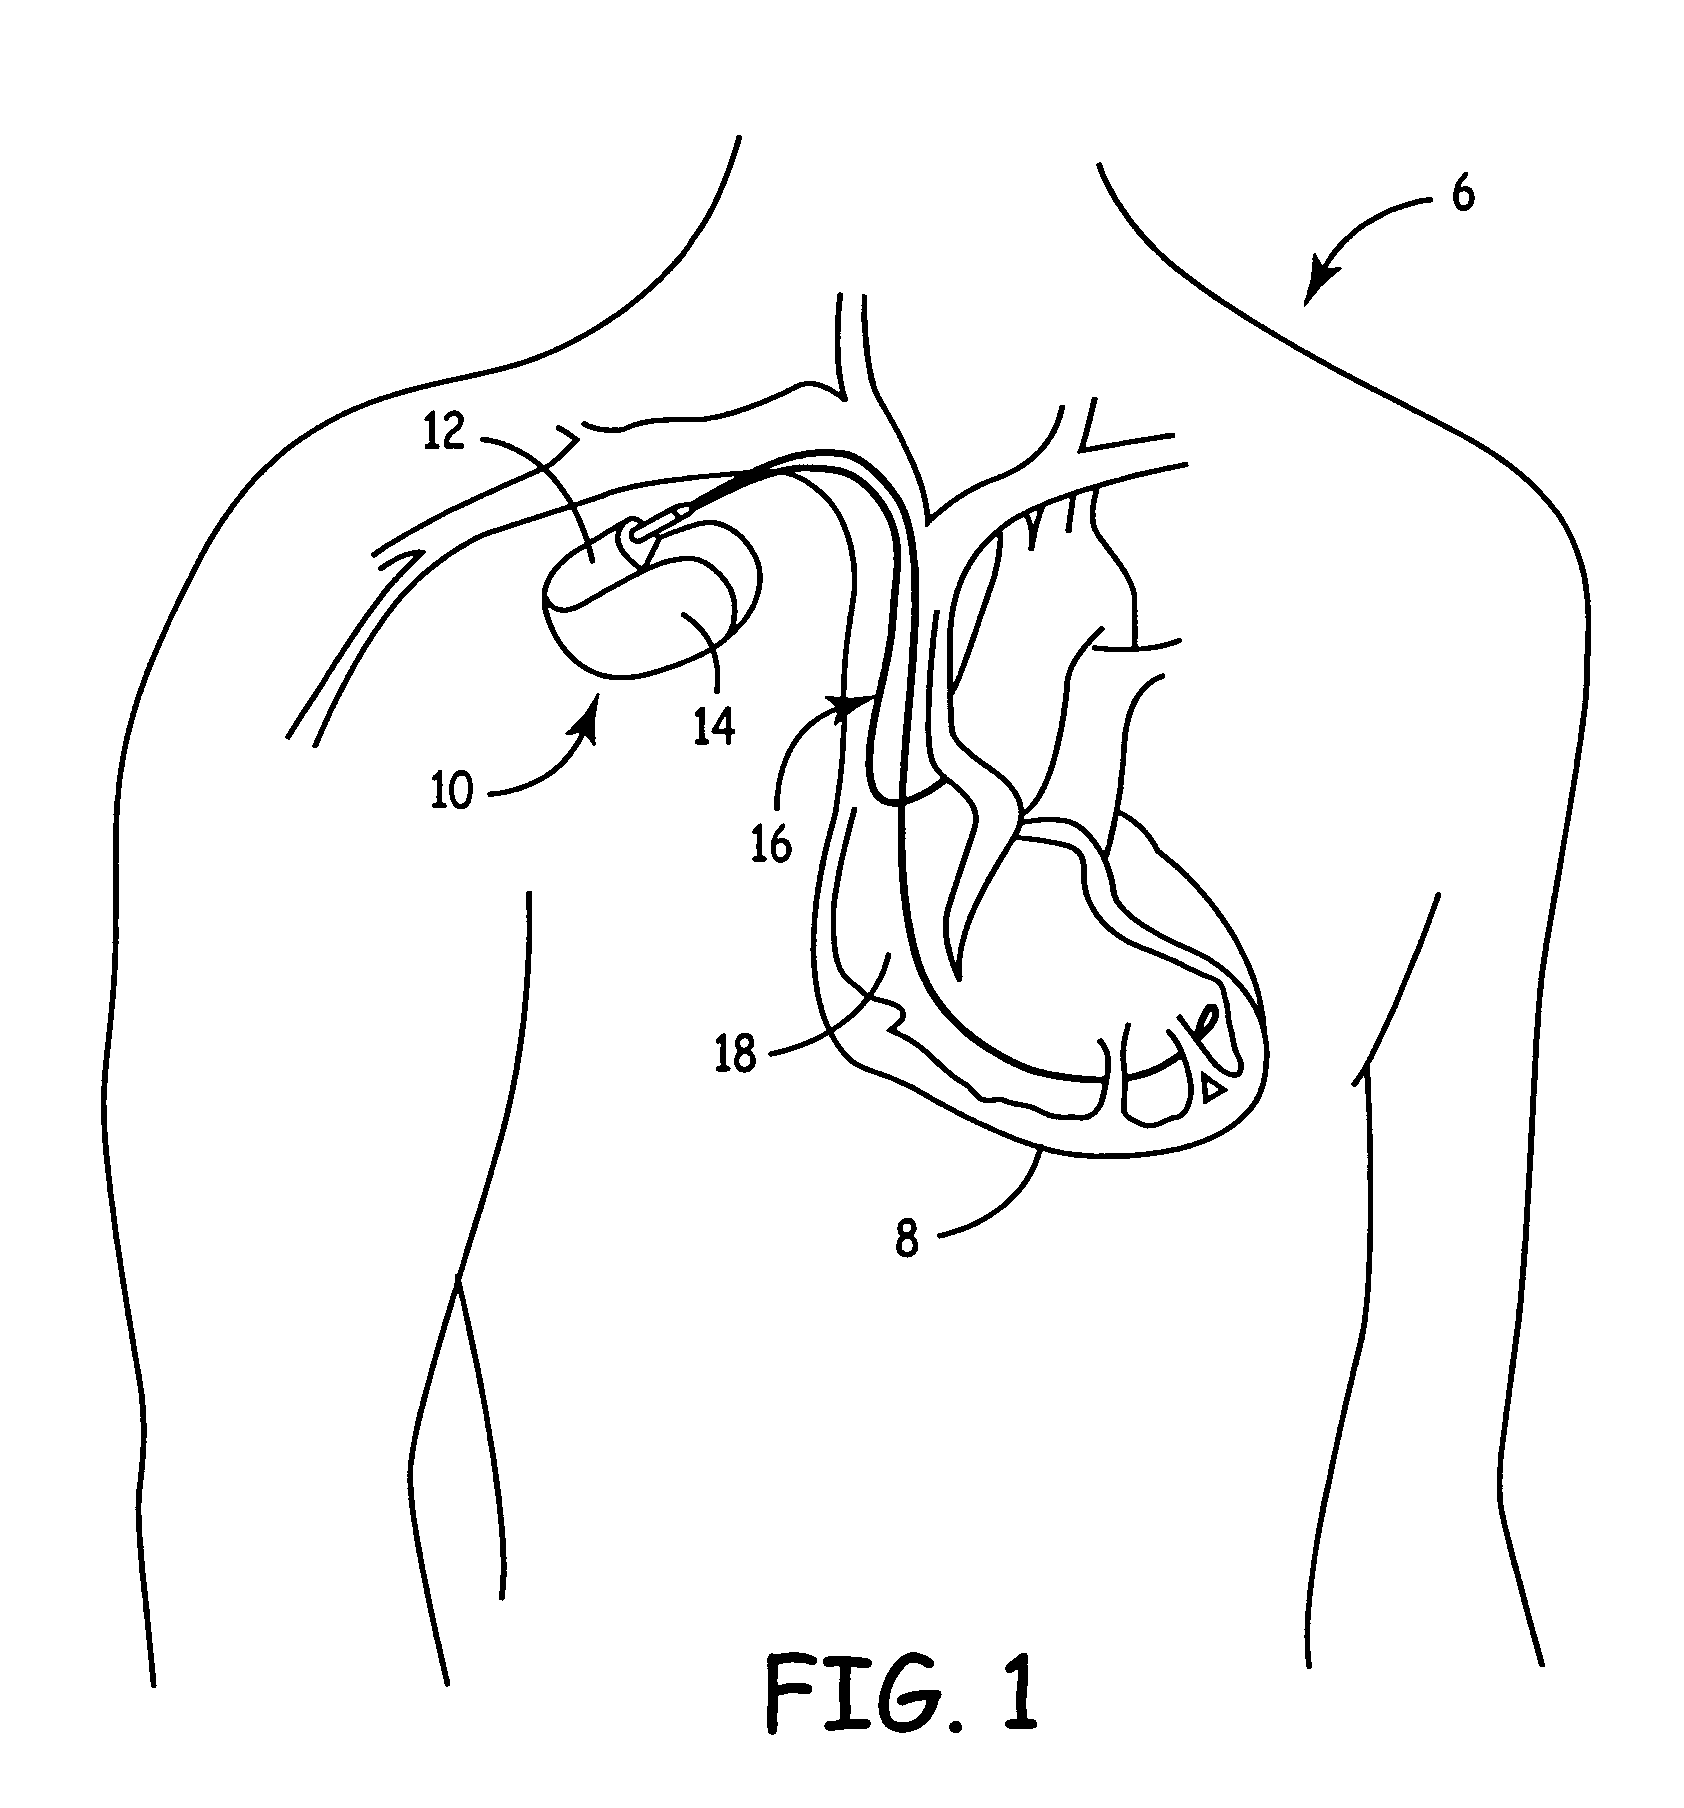 Implantable medical device with ventricular pacing protocol